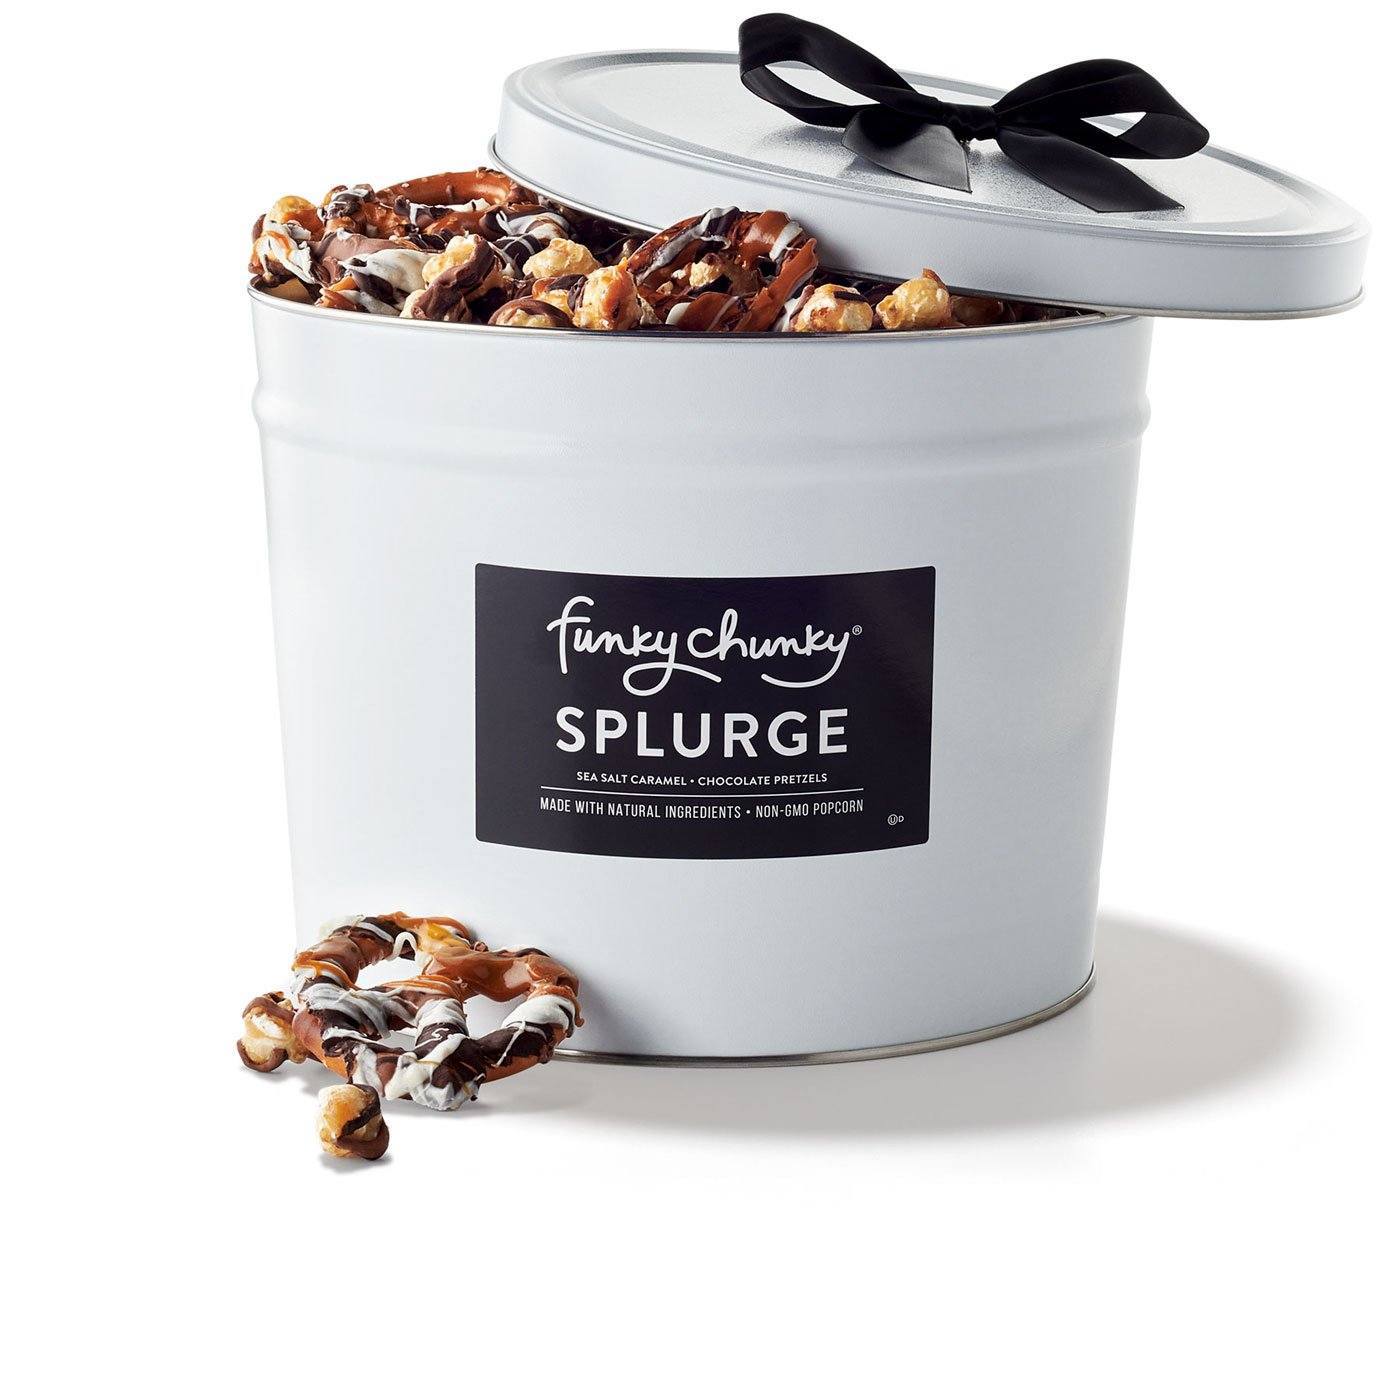 Splurge (4lb.)-Two of our most popular flavors, Sea Salt Caramel Popcorn and Chocolate Pretzels filled to the brim in a sophisticated deluxe gift tin‚Äîthere‚Äôs plenty to go around for all with this ‚Äúsplurge‚Äù of a gift.-Funky Chunky